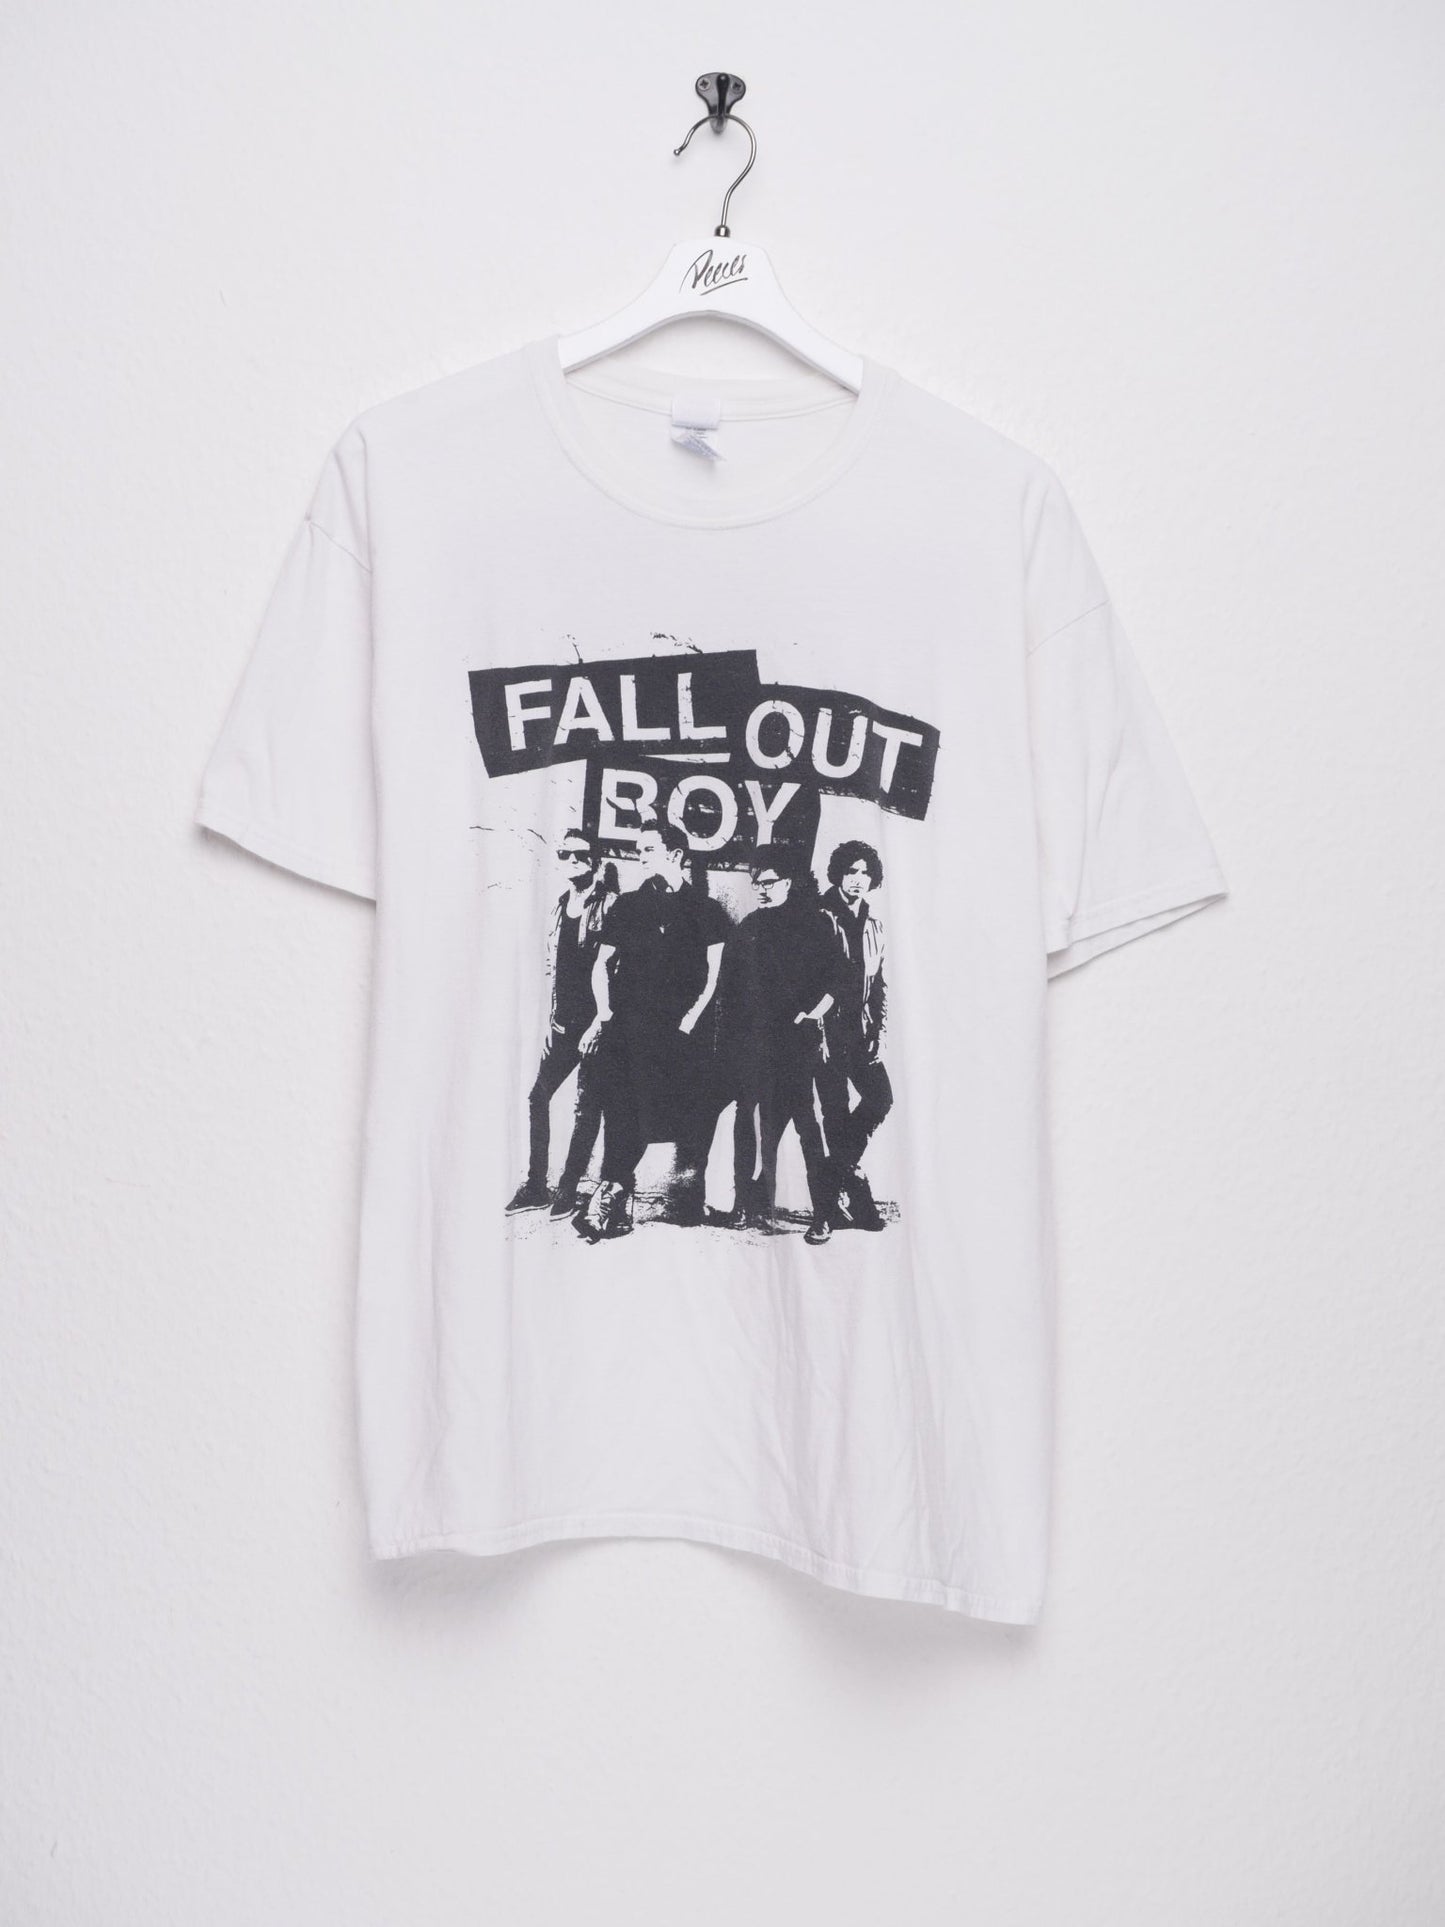 printed 'Fall out Boy' Graphic Vintage Shirt - Peeces